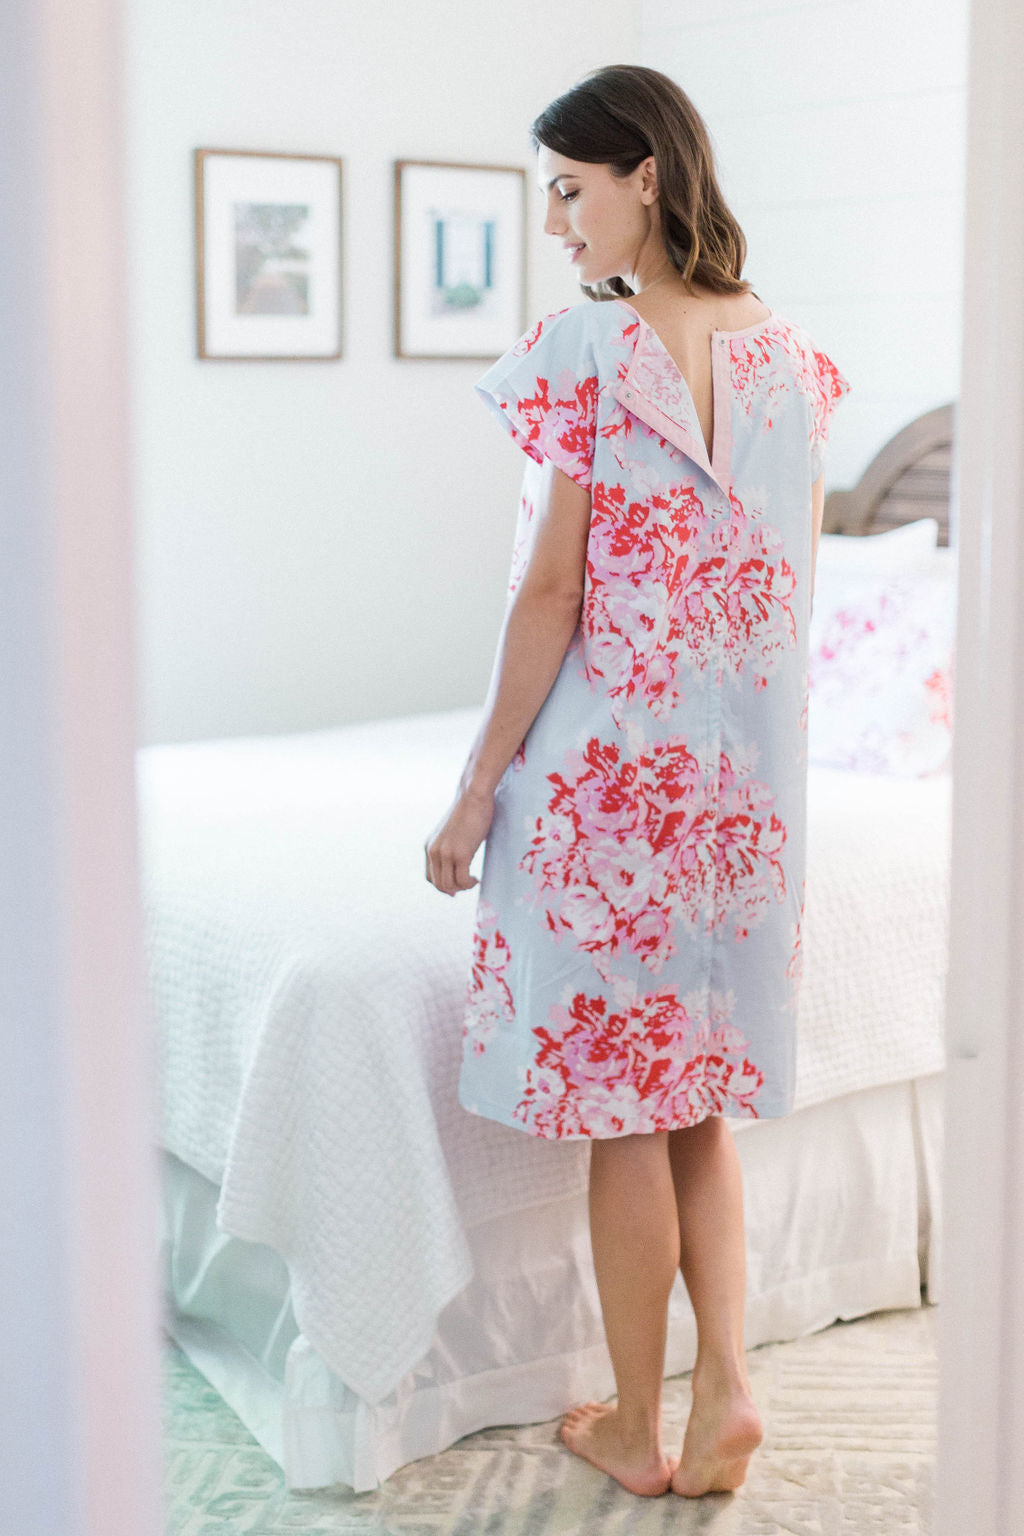 Labor & Delivery Robe For Maternity Hospital & New Moms Postpartum